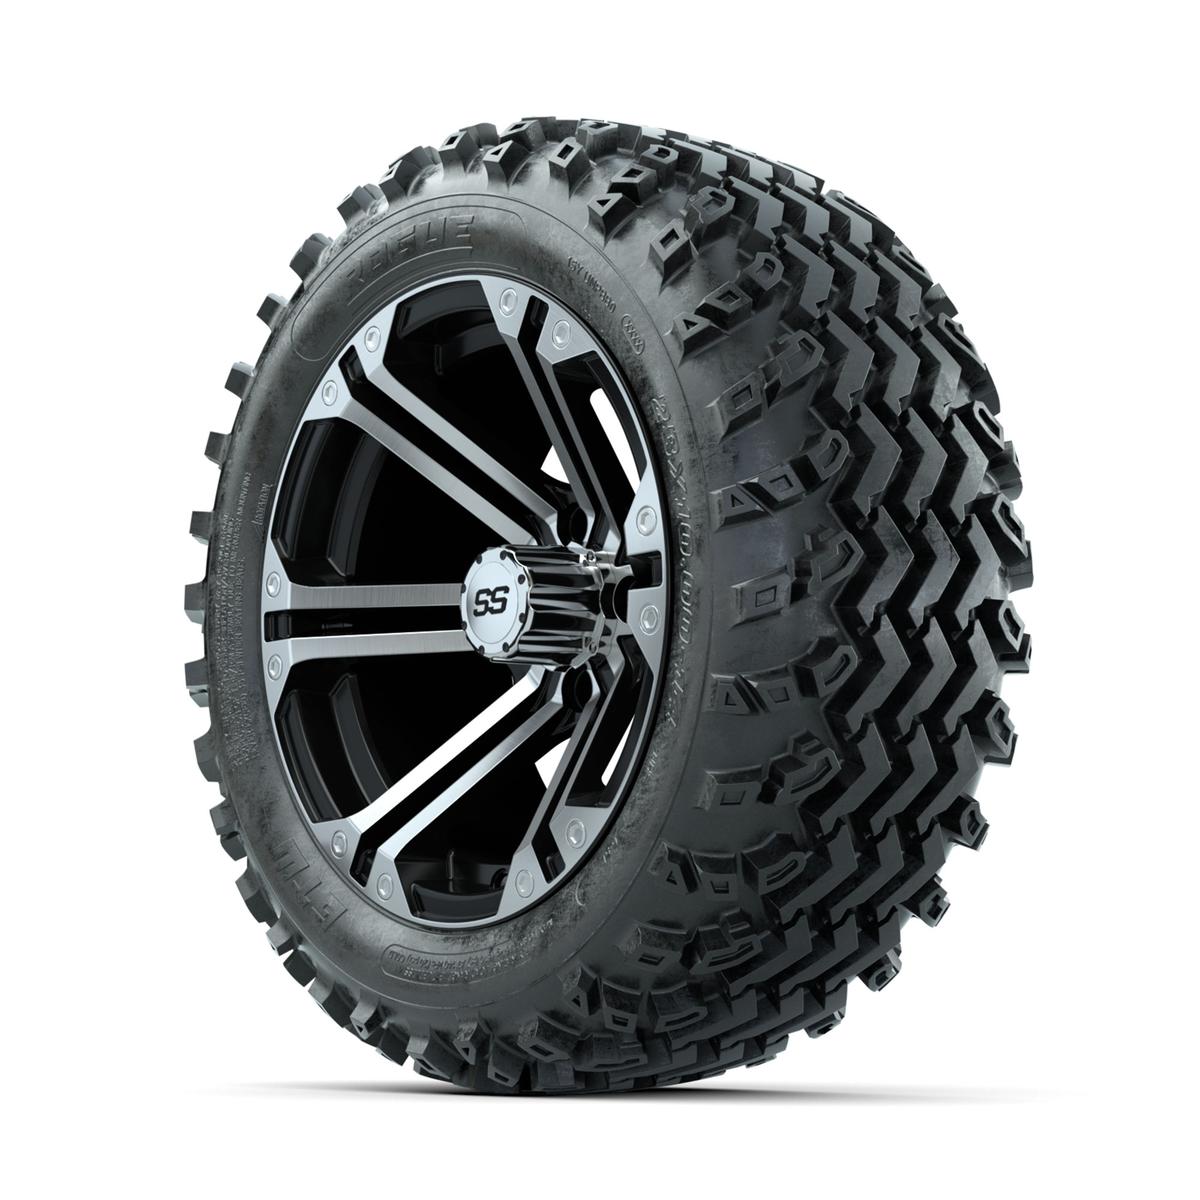 GTW Specter Machined/Black 14 in Wheels with 23x10.00-14 Rogue All Terrain Tires – Full Set